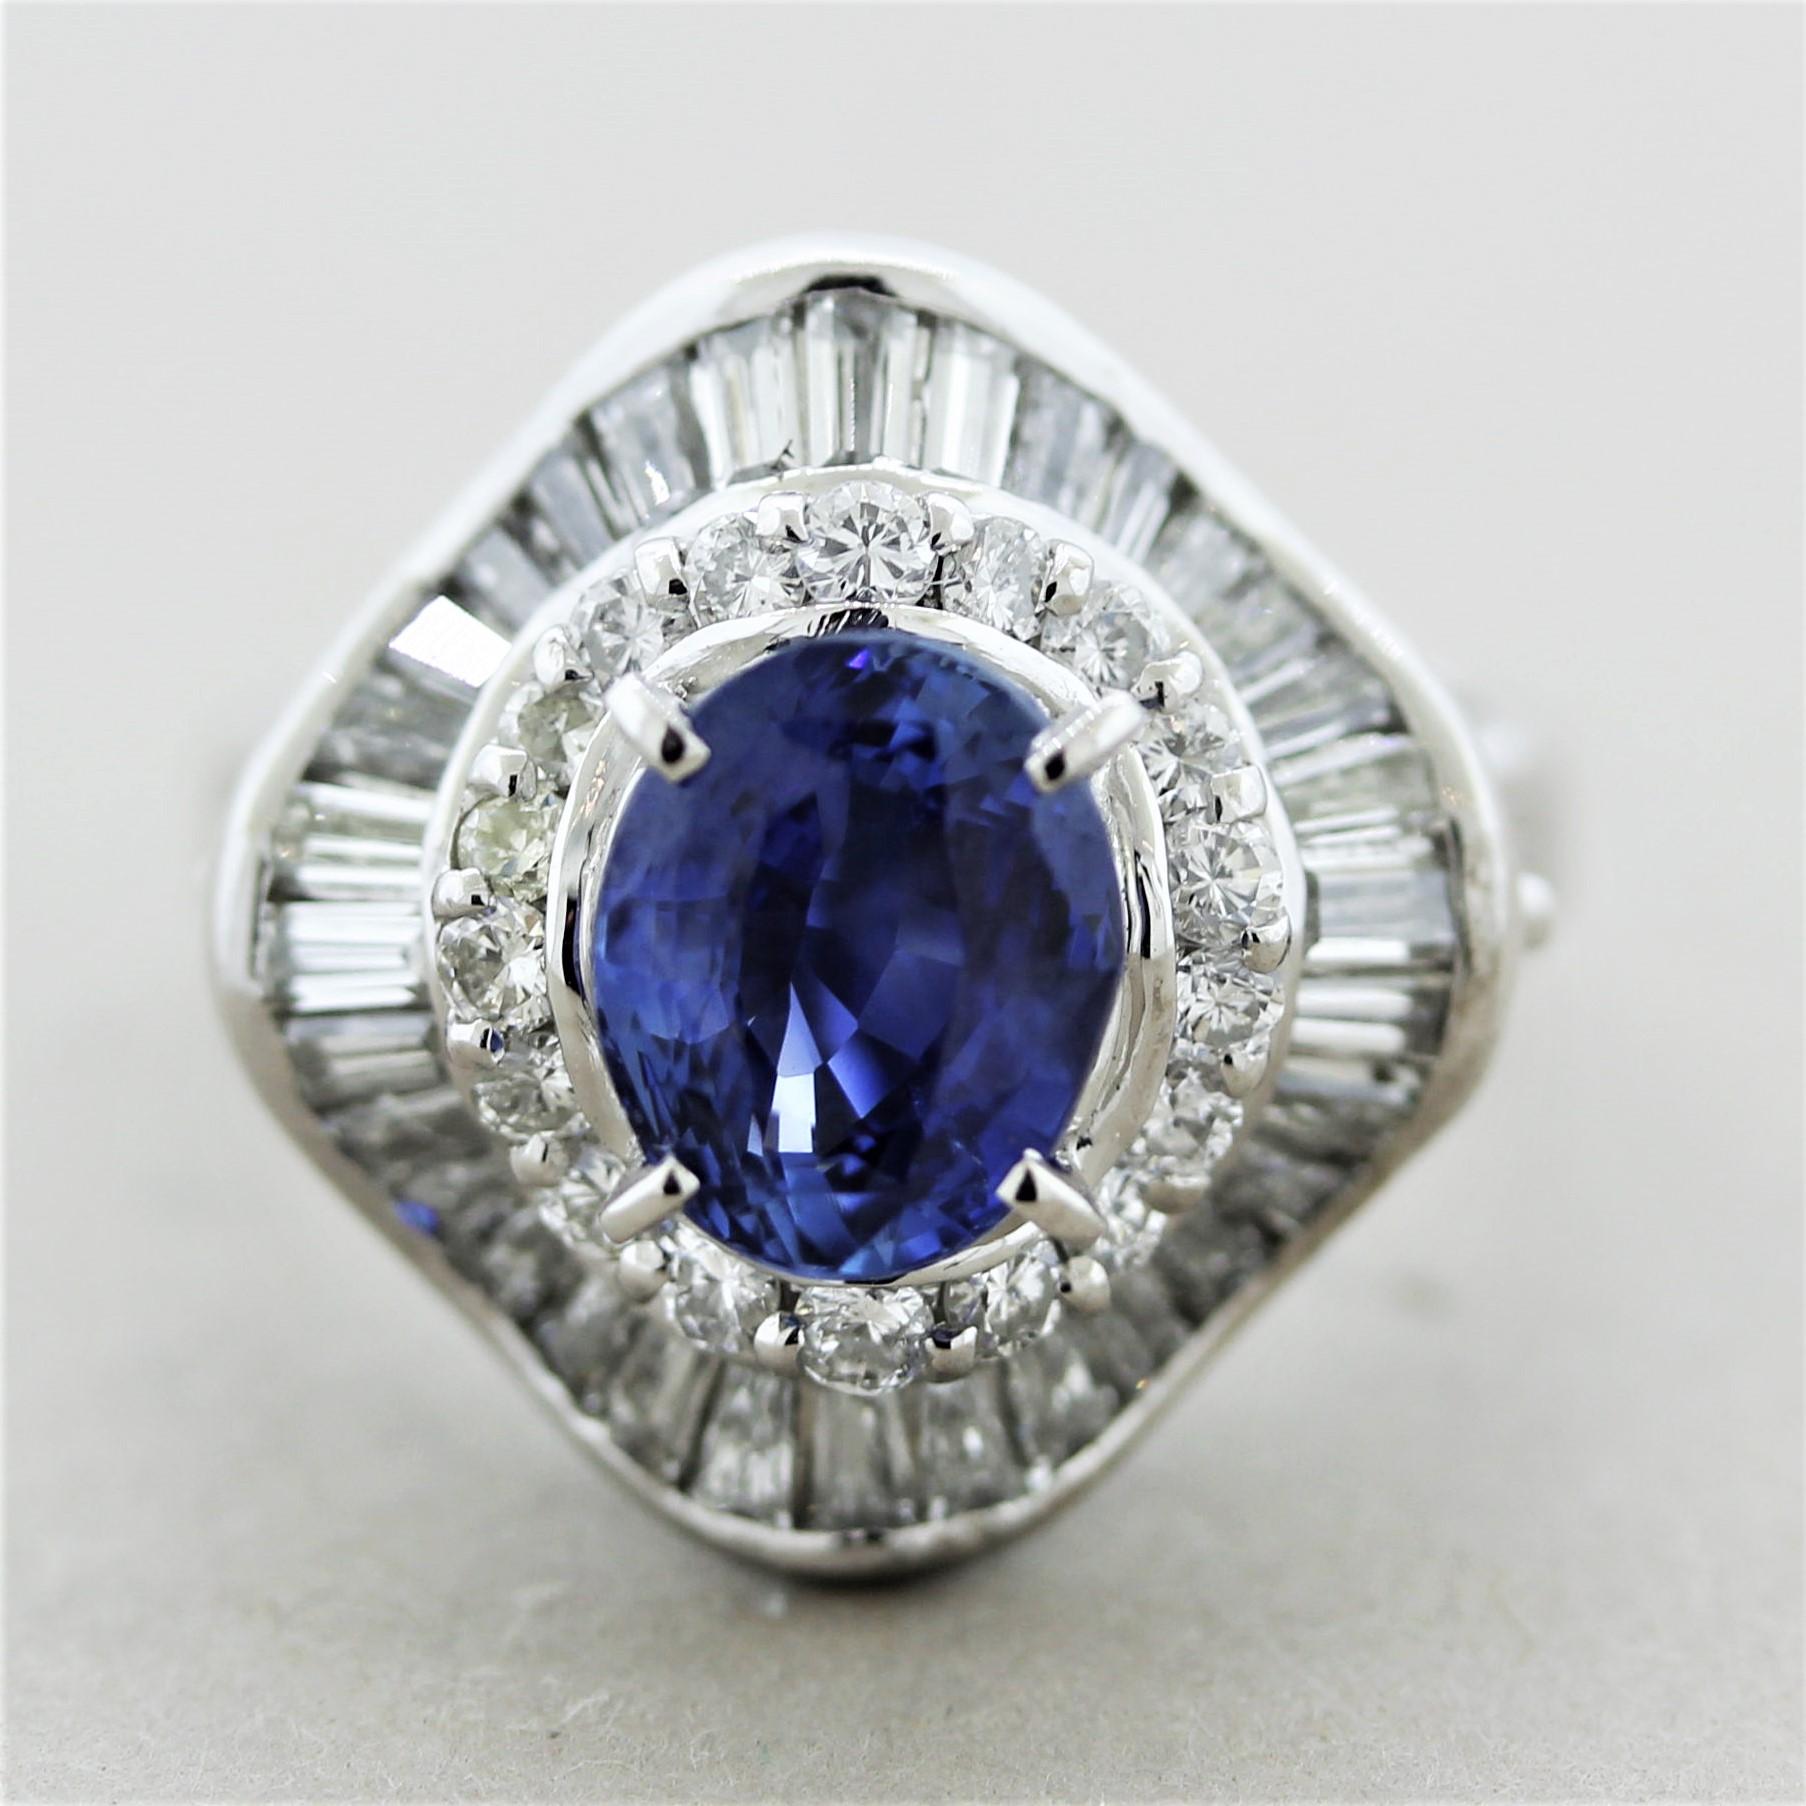 A luscious 2.06 carat oval-shaped sapphire takes center stage. It has a bright and rich royal blue color and is free from any eye-visible inclusions. It is accented by a double halo of round brilliant and baguette-cut diamond set around the